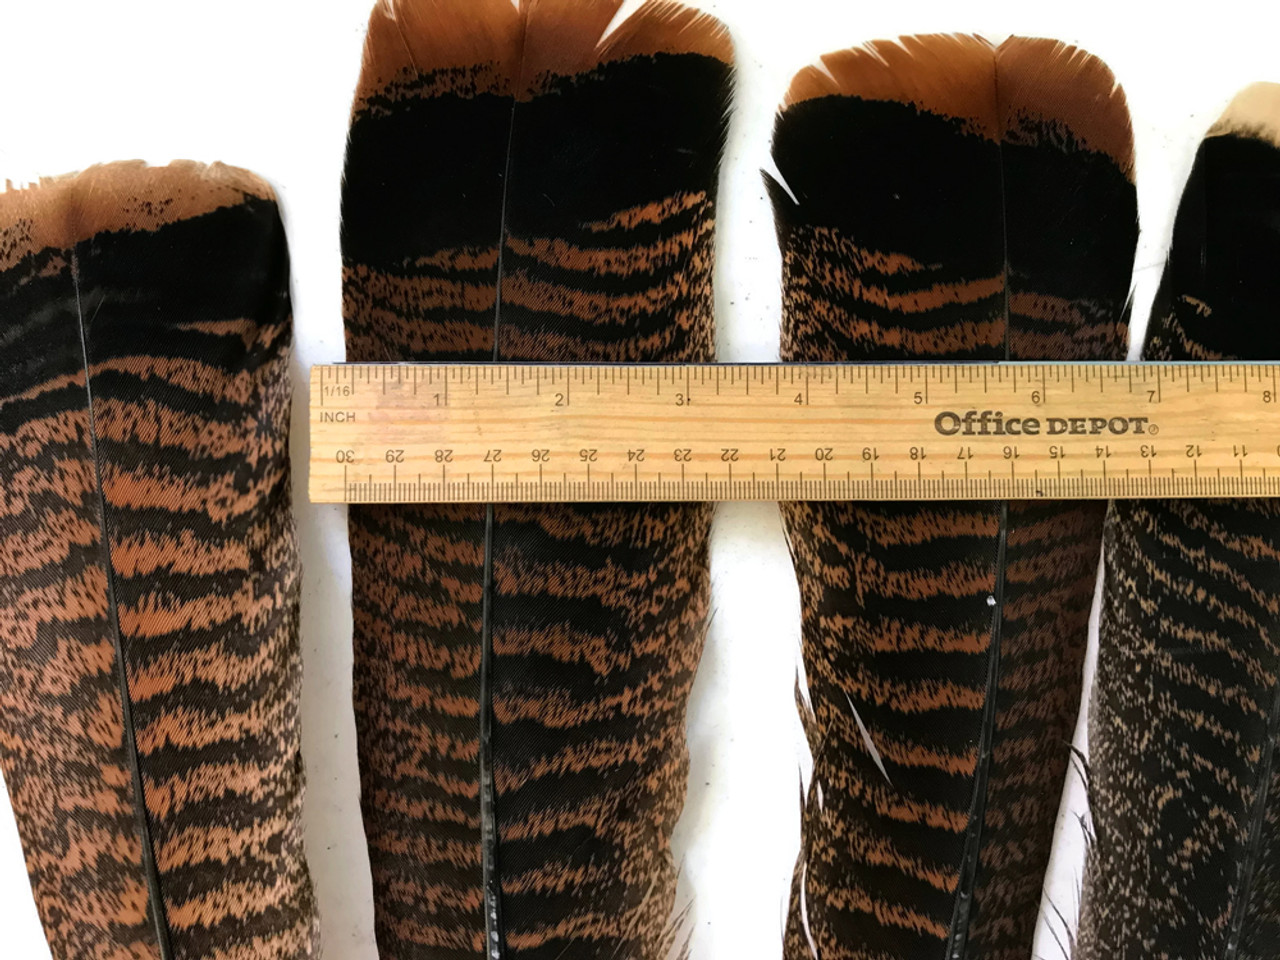 1/4 lb Natural Black and Brown Wild Turkey Tail Feathers